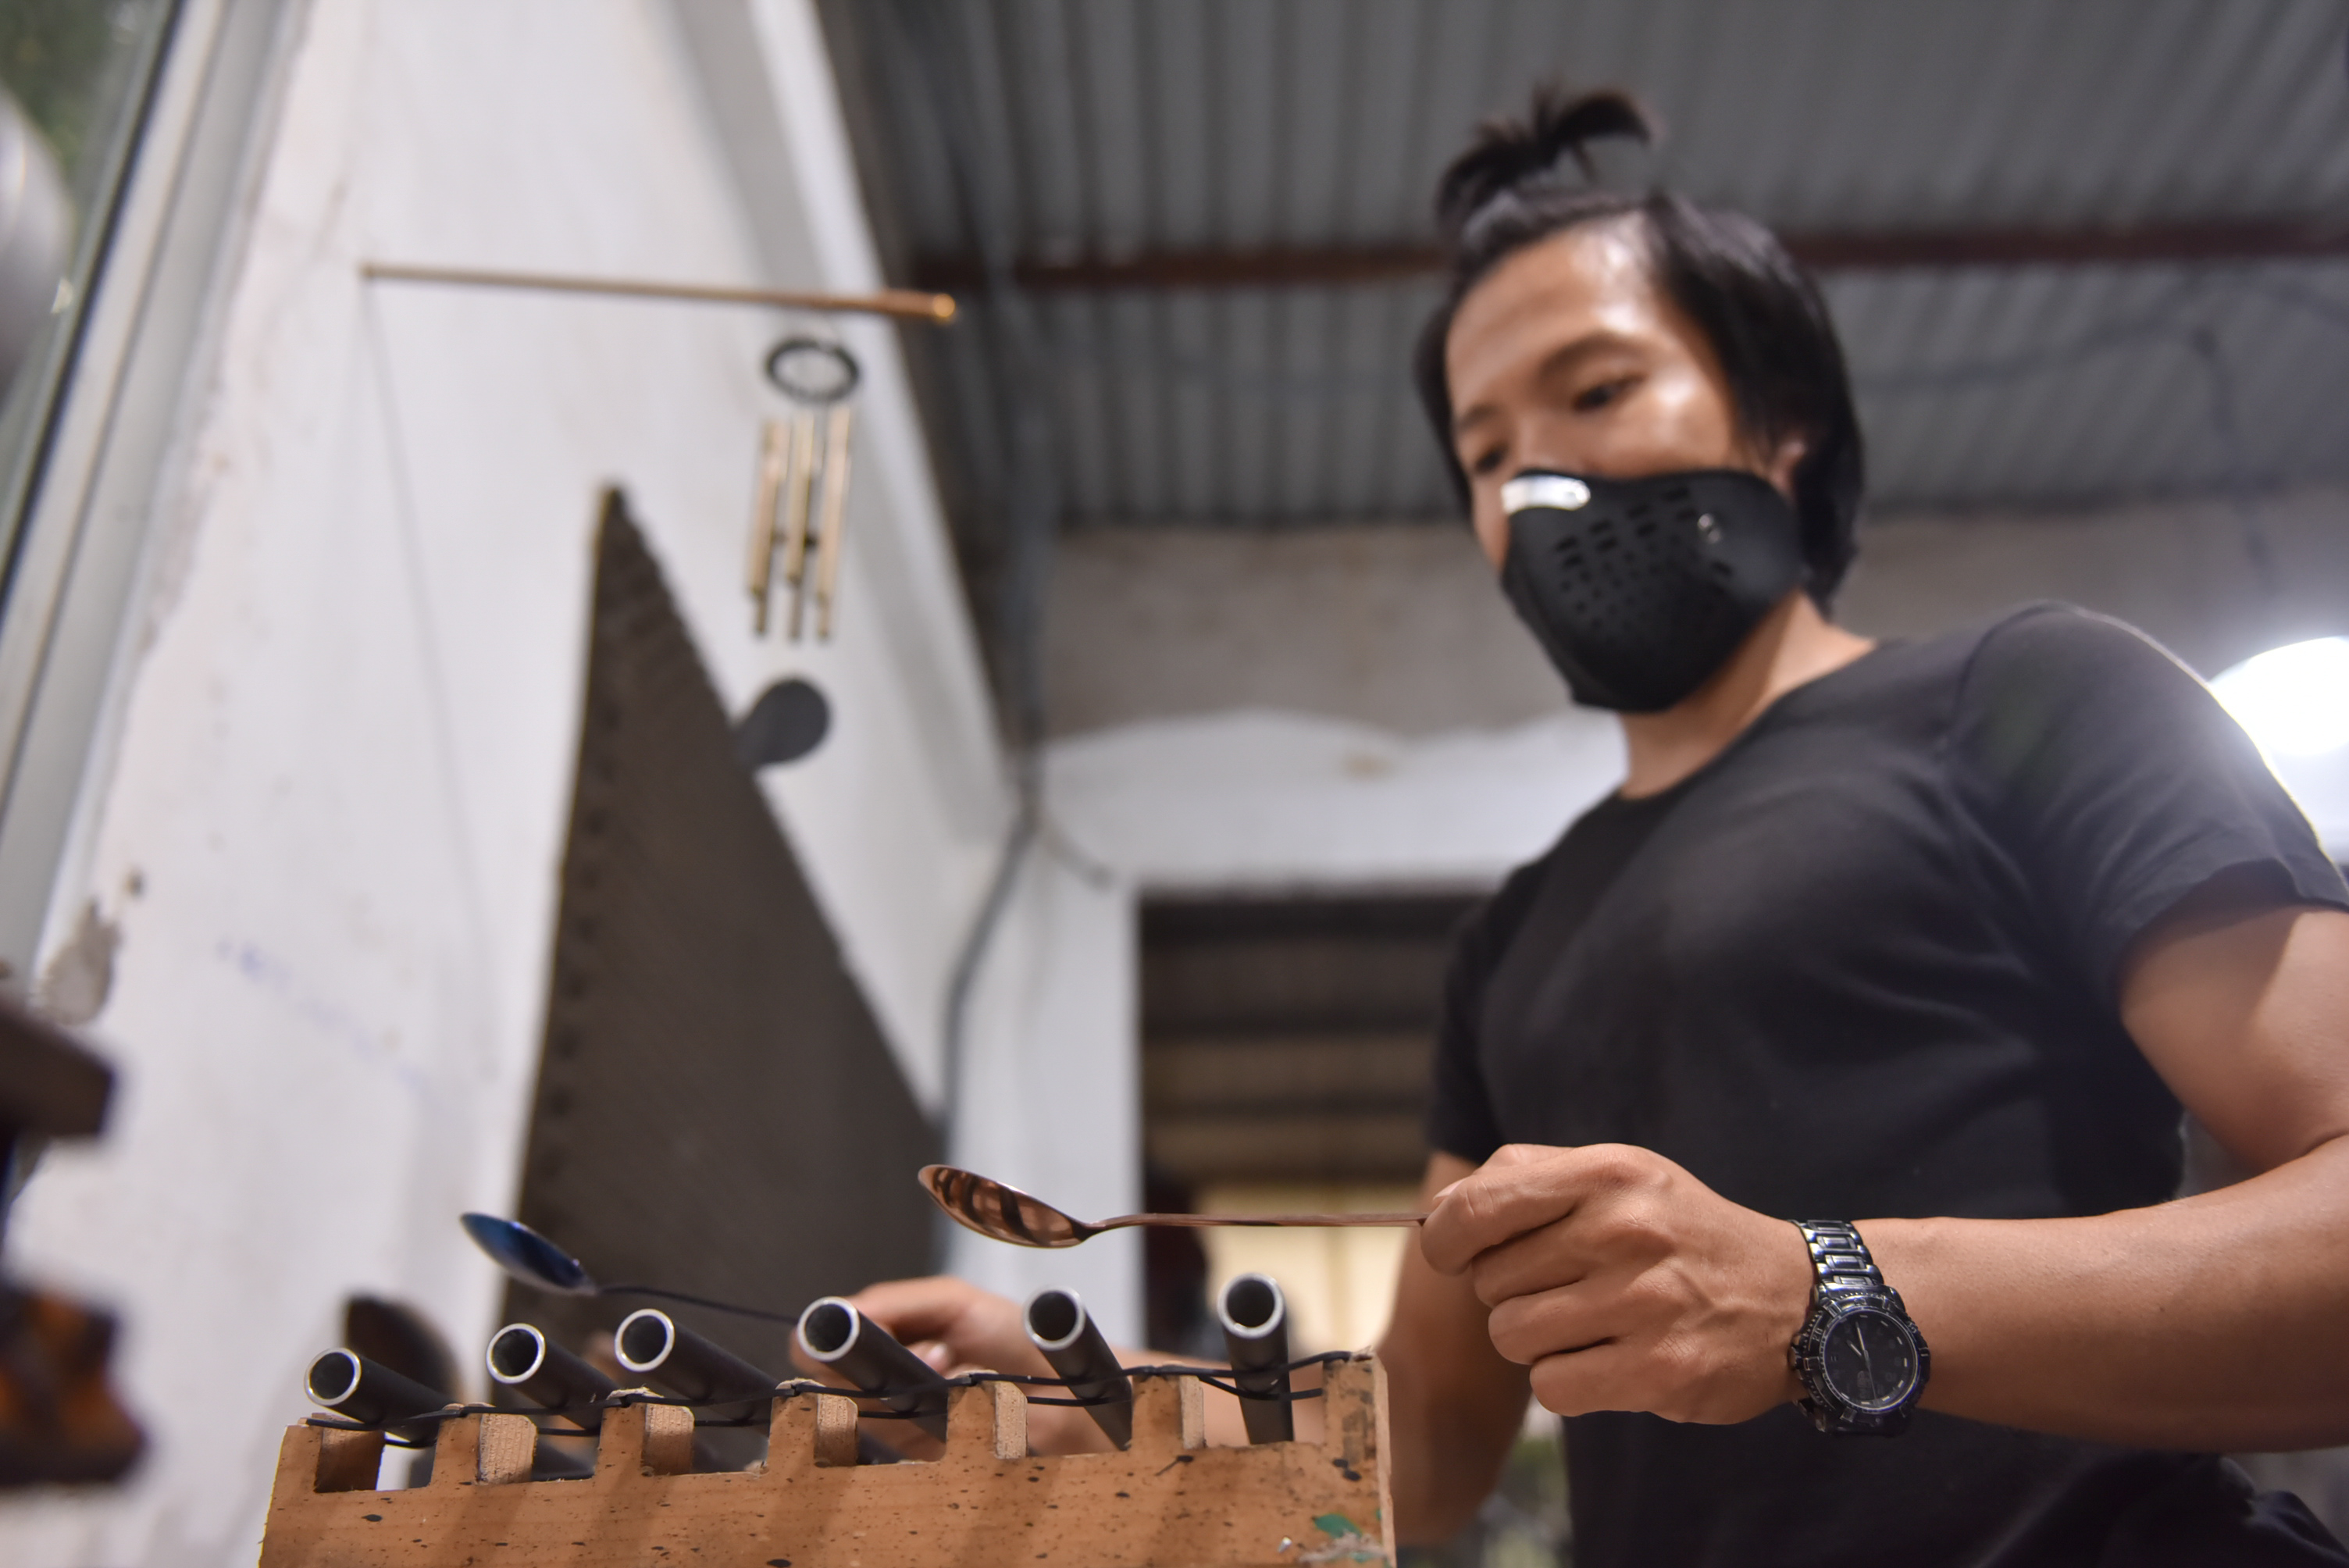 Tran Ngoc Hong Duc uses two spoons to test the sound of a number of tubes prepared to be assembled into wind chimes. Photo: Ngoc Phuong / Tuoi Tre News